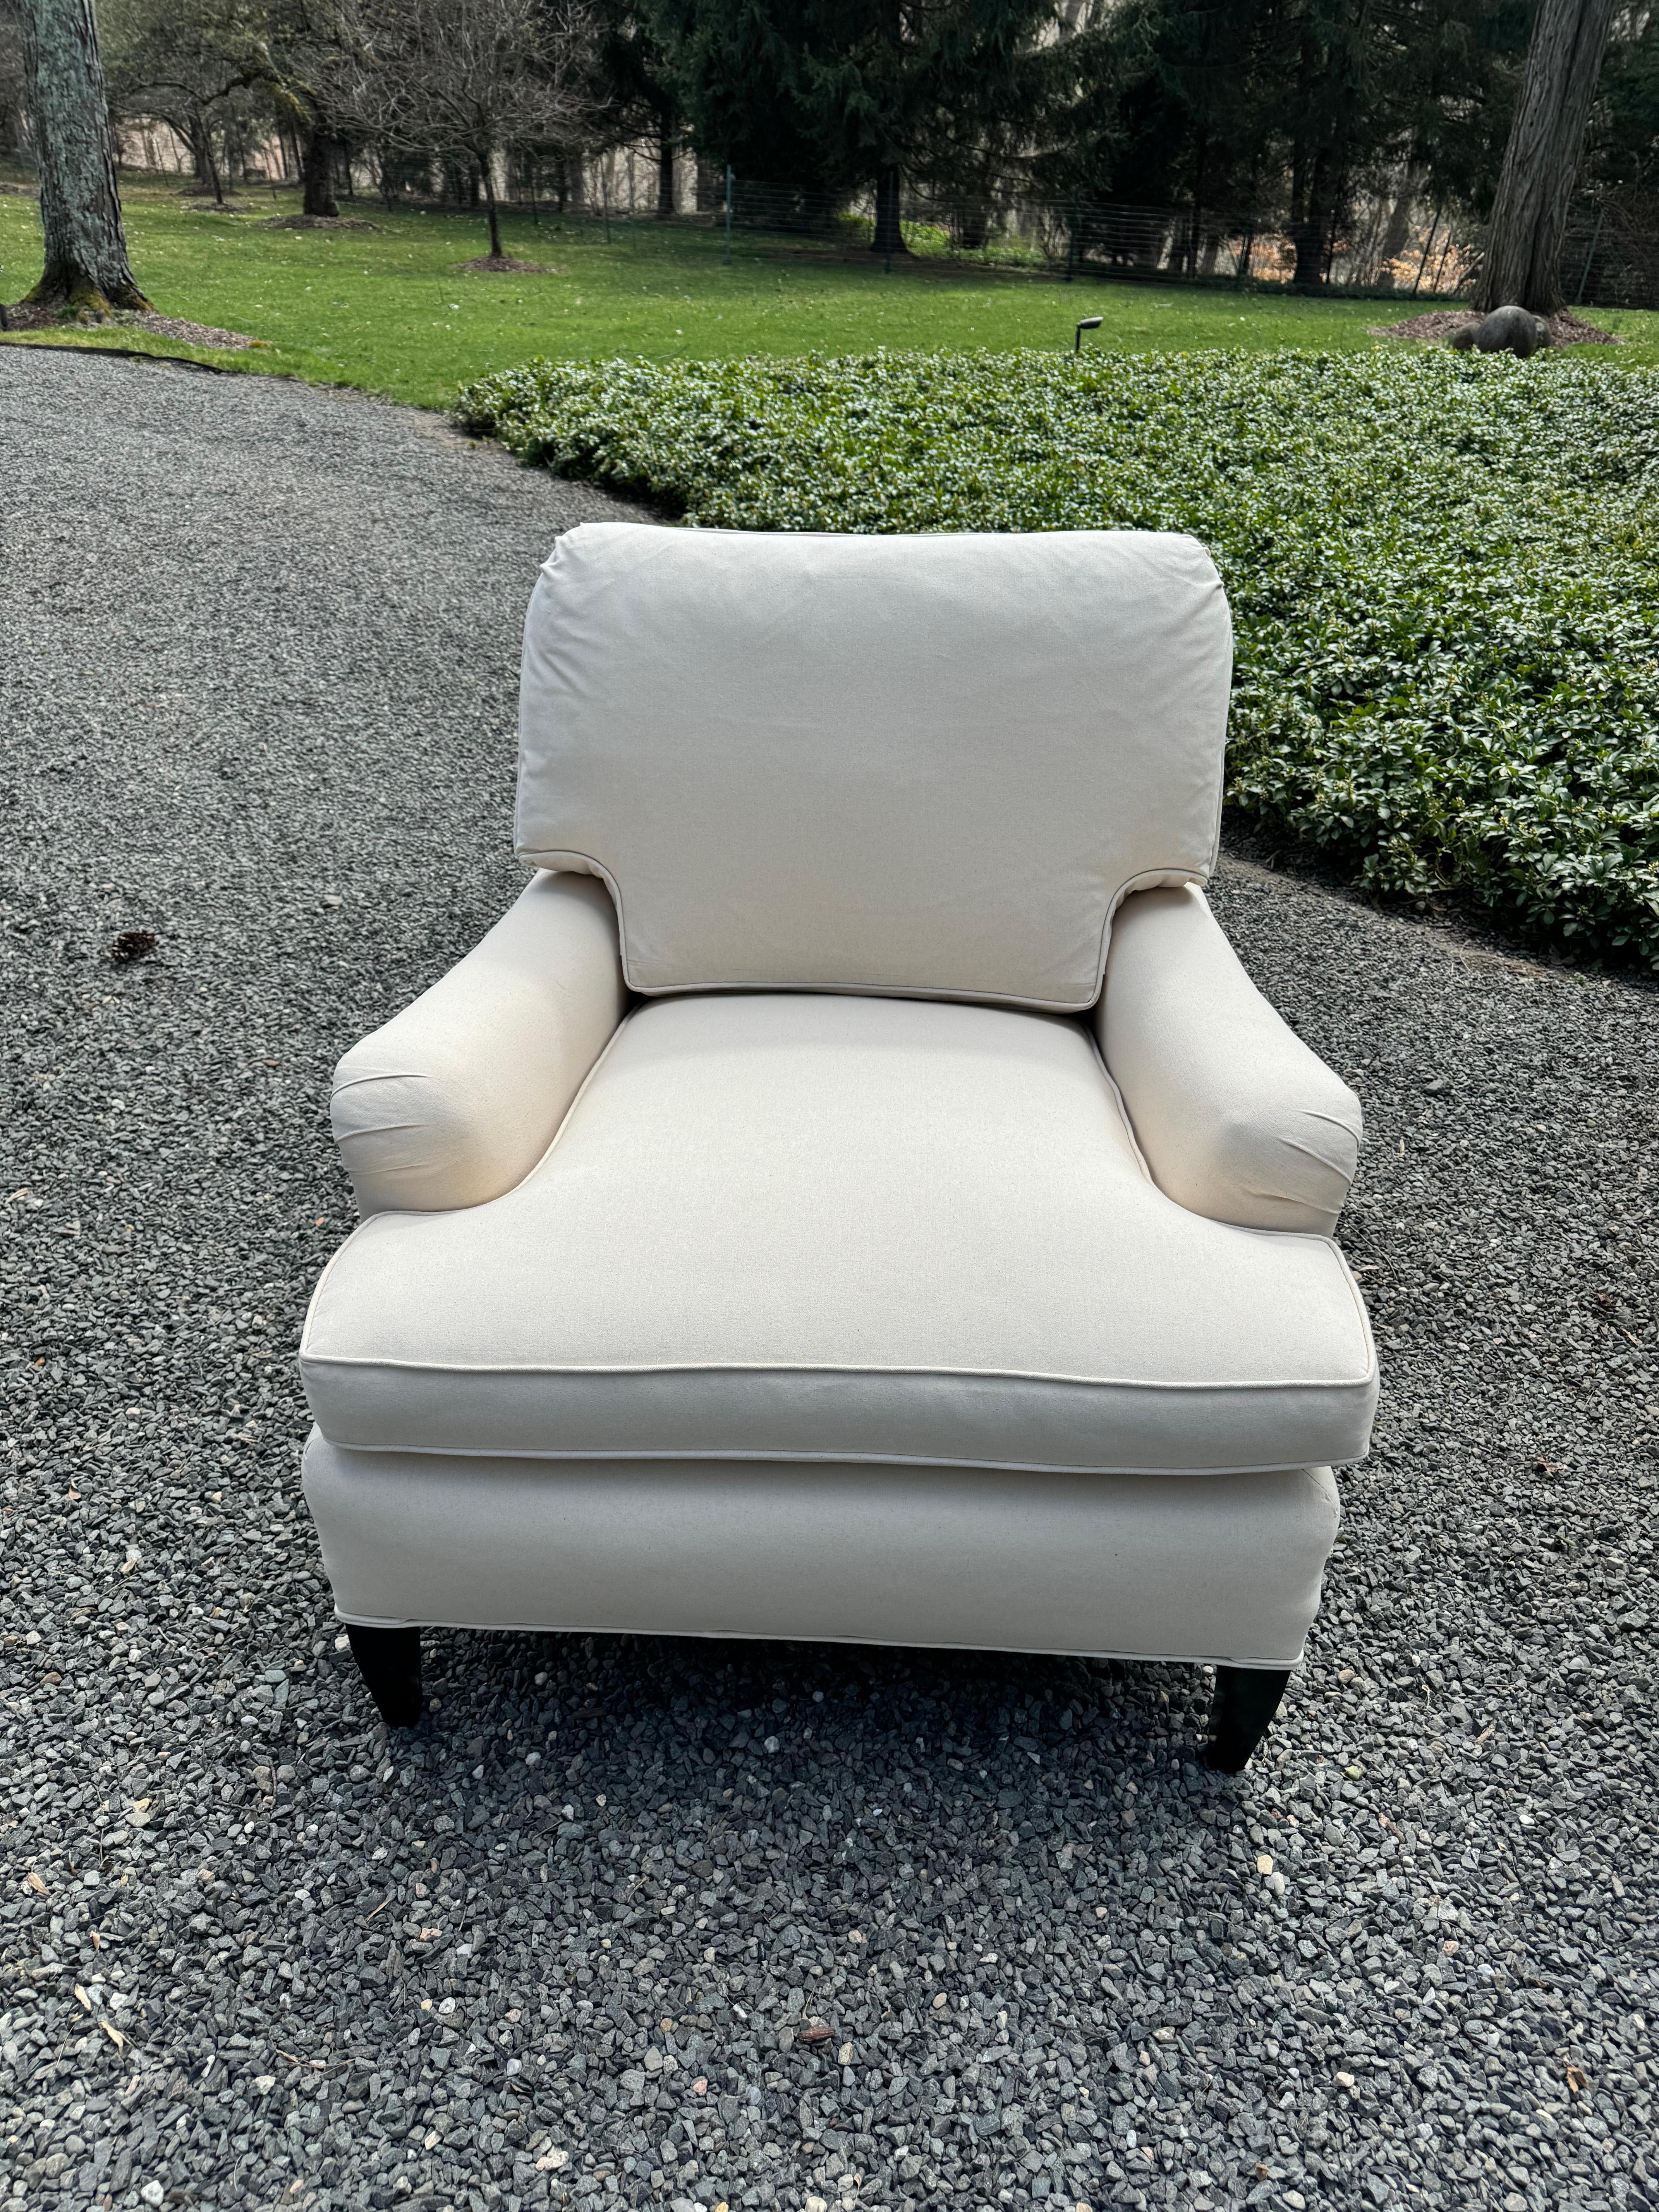 Classic pair of very comfortable luxurious newly upholstered club chairs having clean, crisp off white cotton duck fabric, with sophisticated silhouette.  Loose back and seat cushions; ebonized legs.  
Seat depth 27
seat interior width 23
arm height